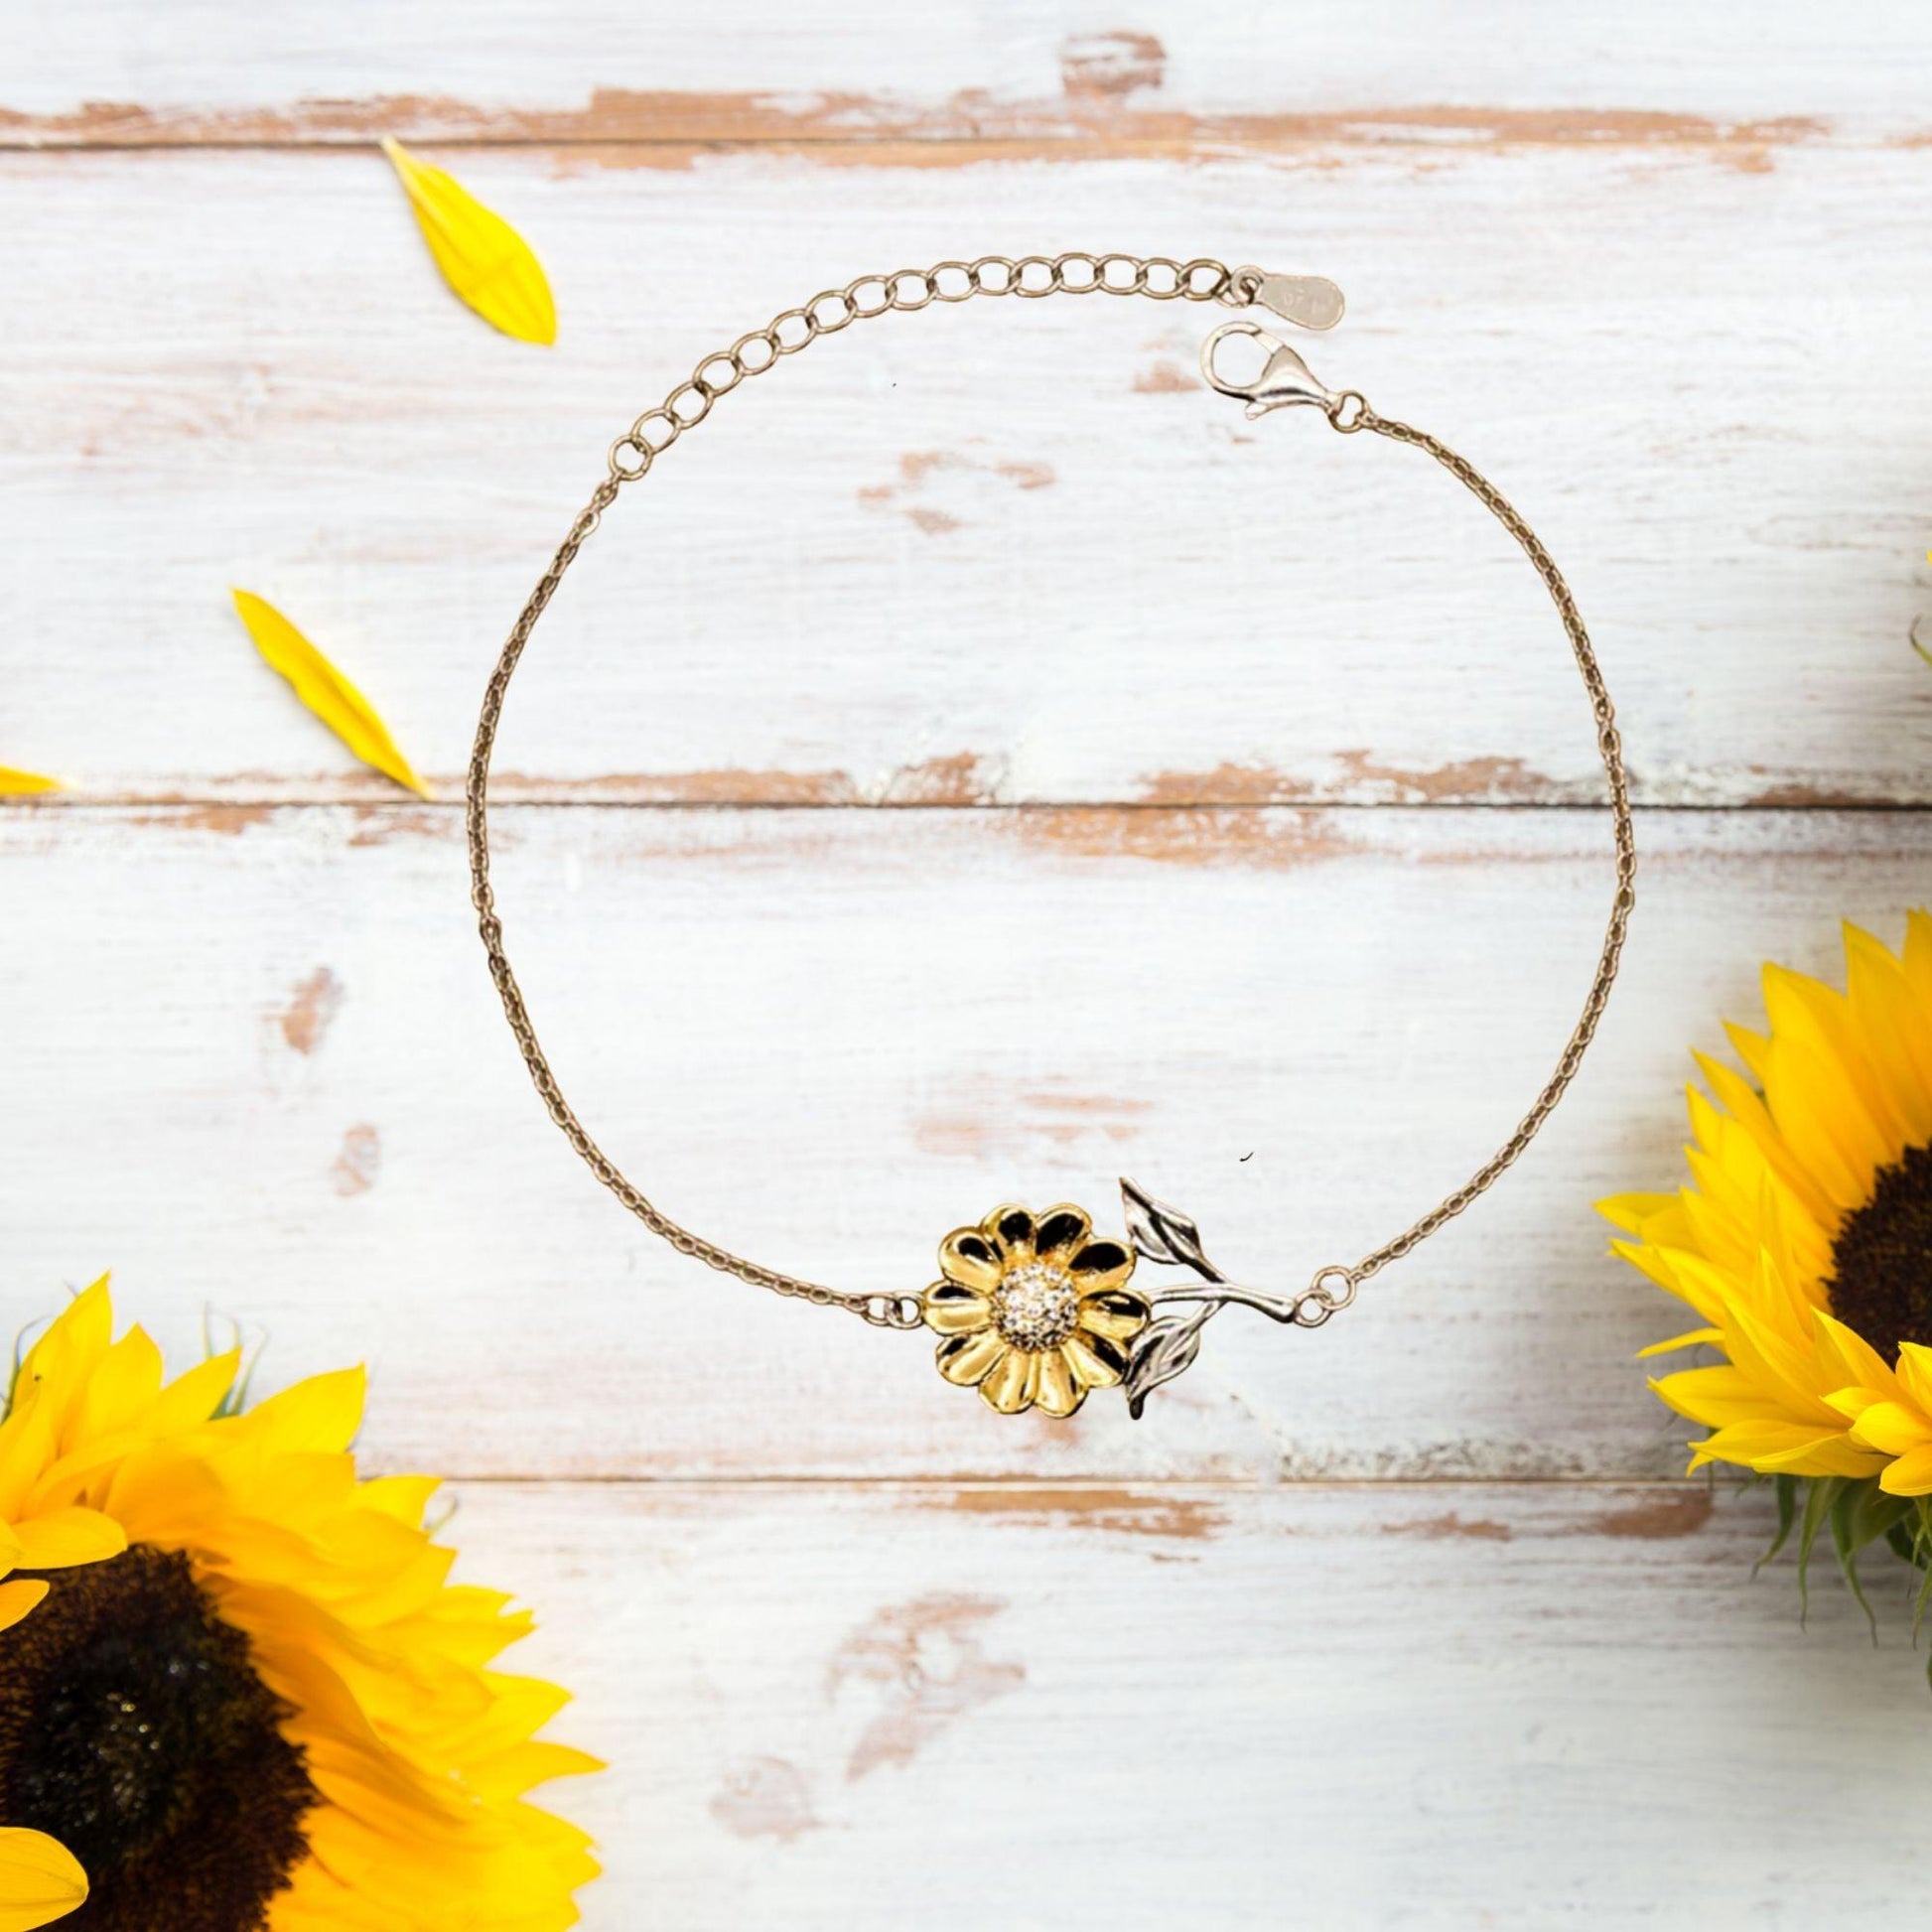 Remarkable Drug Counselor Gifts, Your dedication and hard work, Inspirational Birthday Christmas Unique Sunflower Bracelet For Drug Counselor, Coworkers, Men, Women, Friends - Mallard Moon Gift Shop